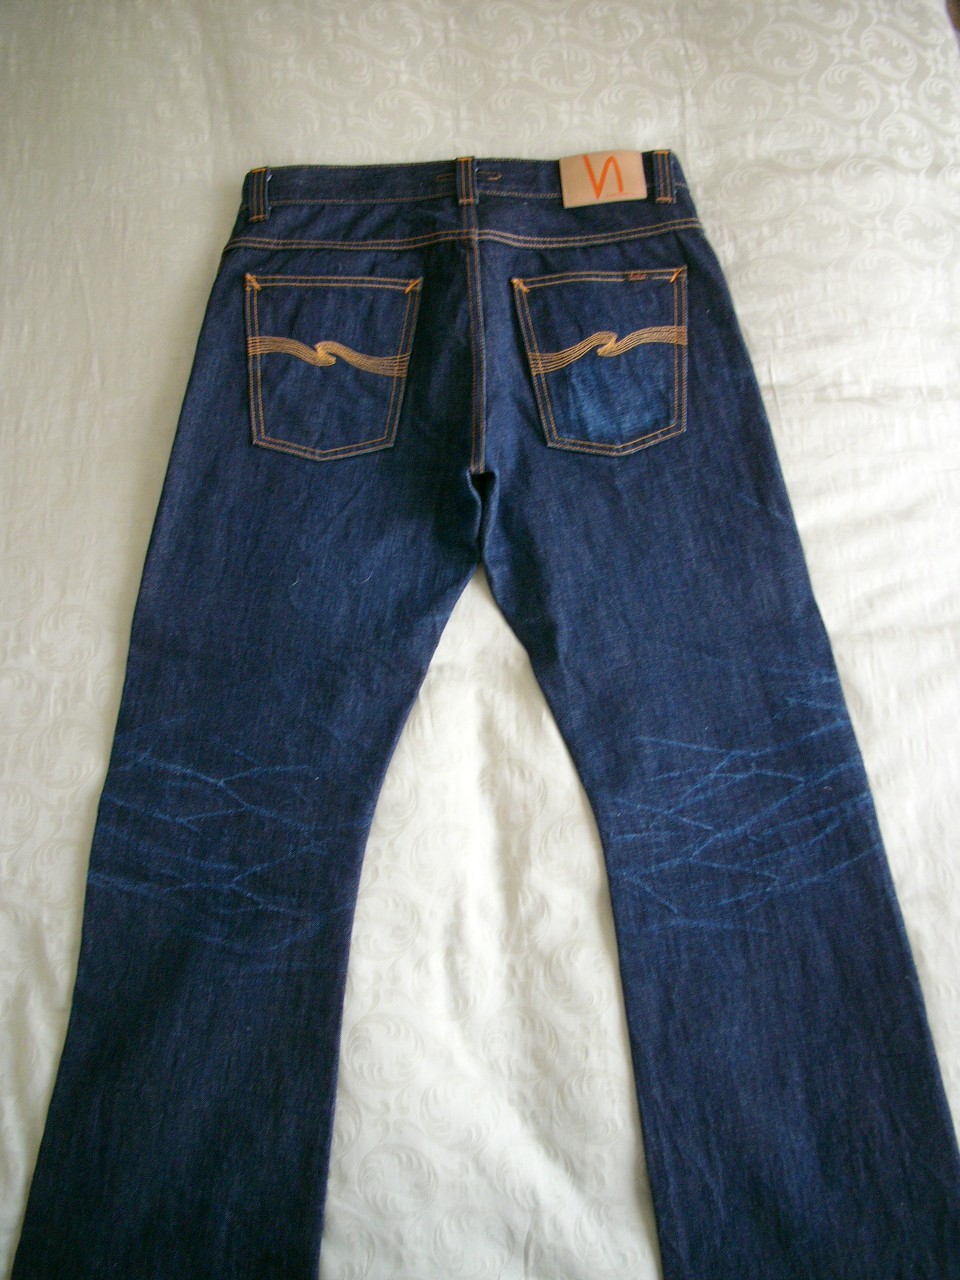 My Nudie RR dry selvedge after moderate use for 6 months and one wash.  The wear marks were accentuated by using a chopped up piece of denim that was soaked in hot water and then rubbed whilst wearing the jeans (edit: effect also accentuated by rubbing damp hands on the jeans.). The back of the knee was also treated the same way: